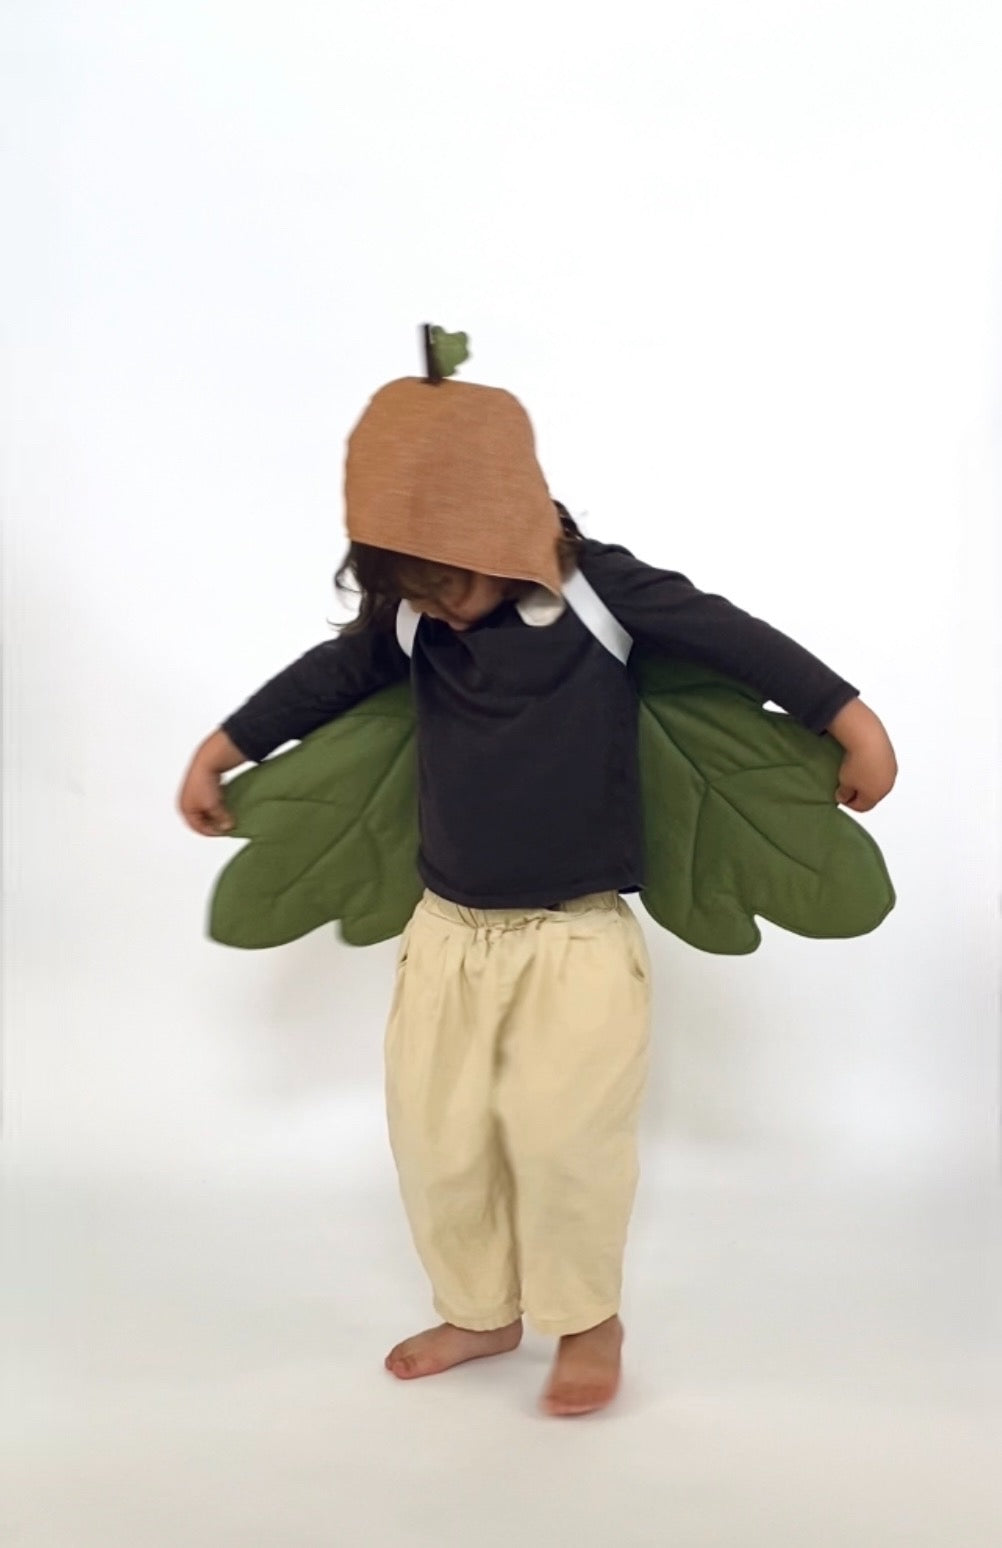 Enchanted forest fairy costume with acorn hat.